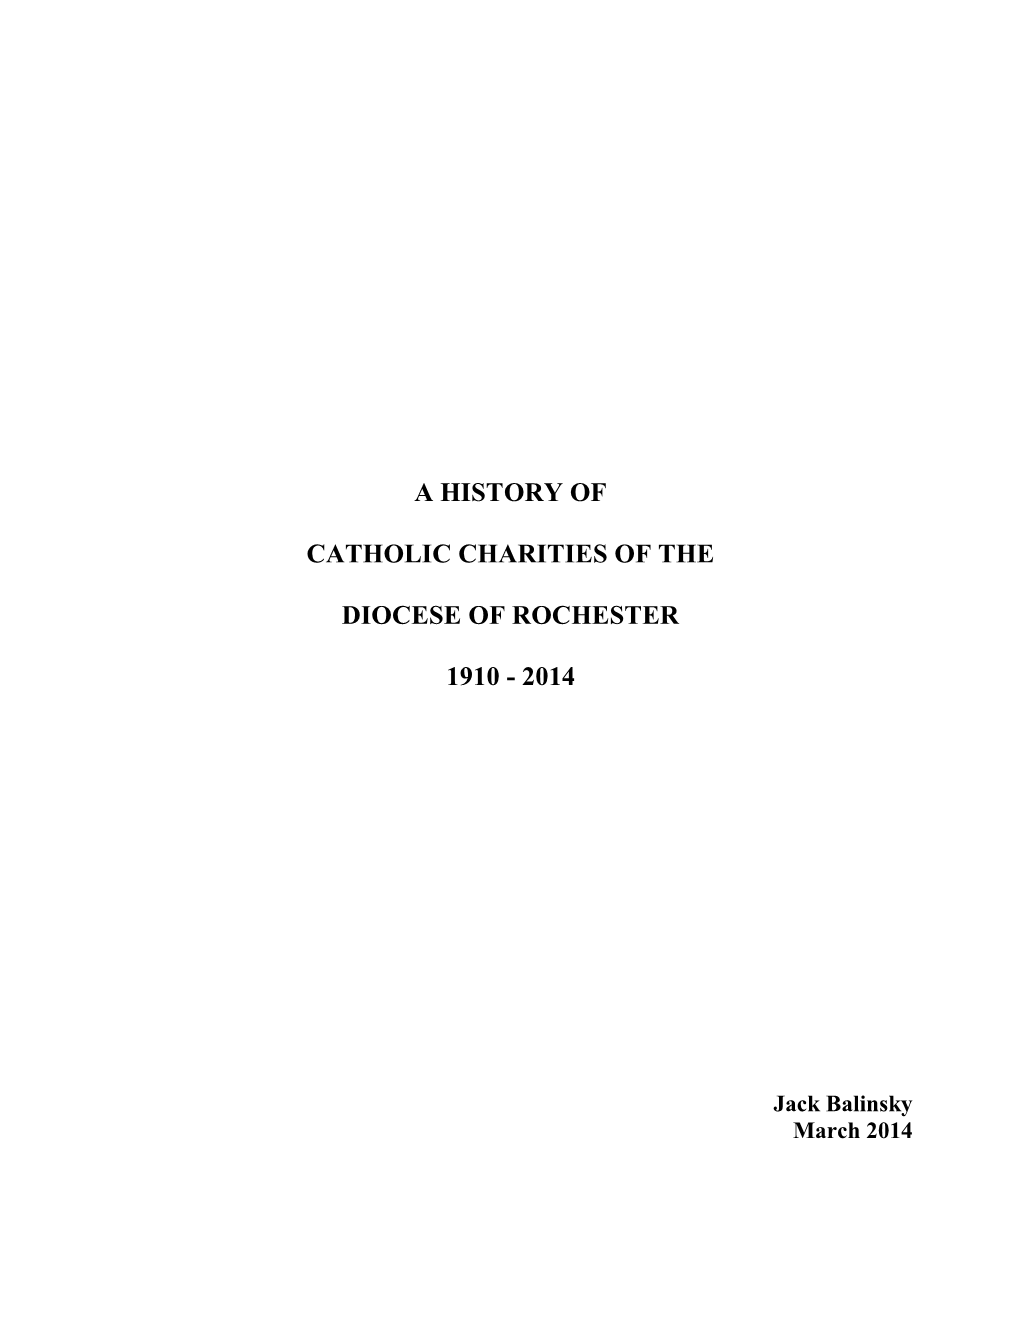 A History of Catholic Charities of the Diocese of Rochester 1910